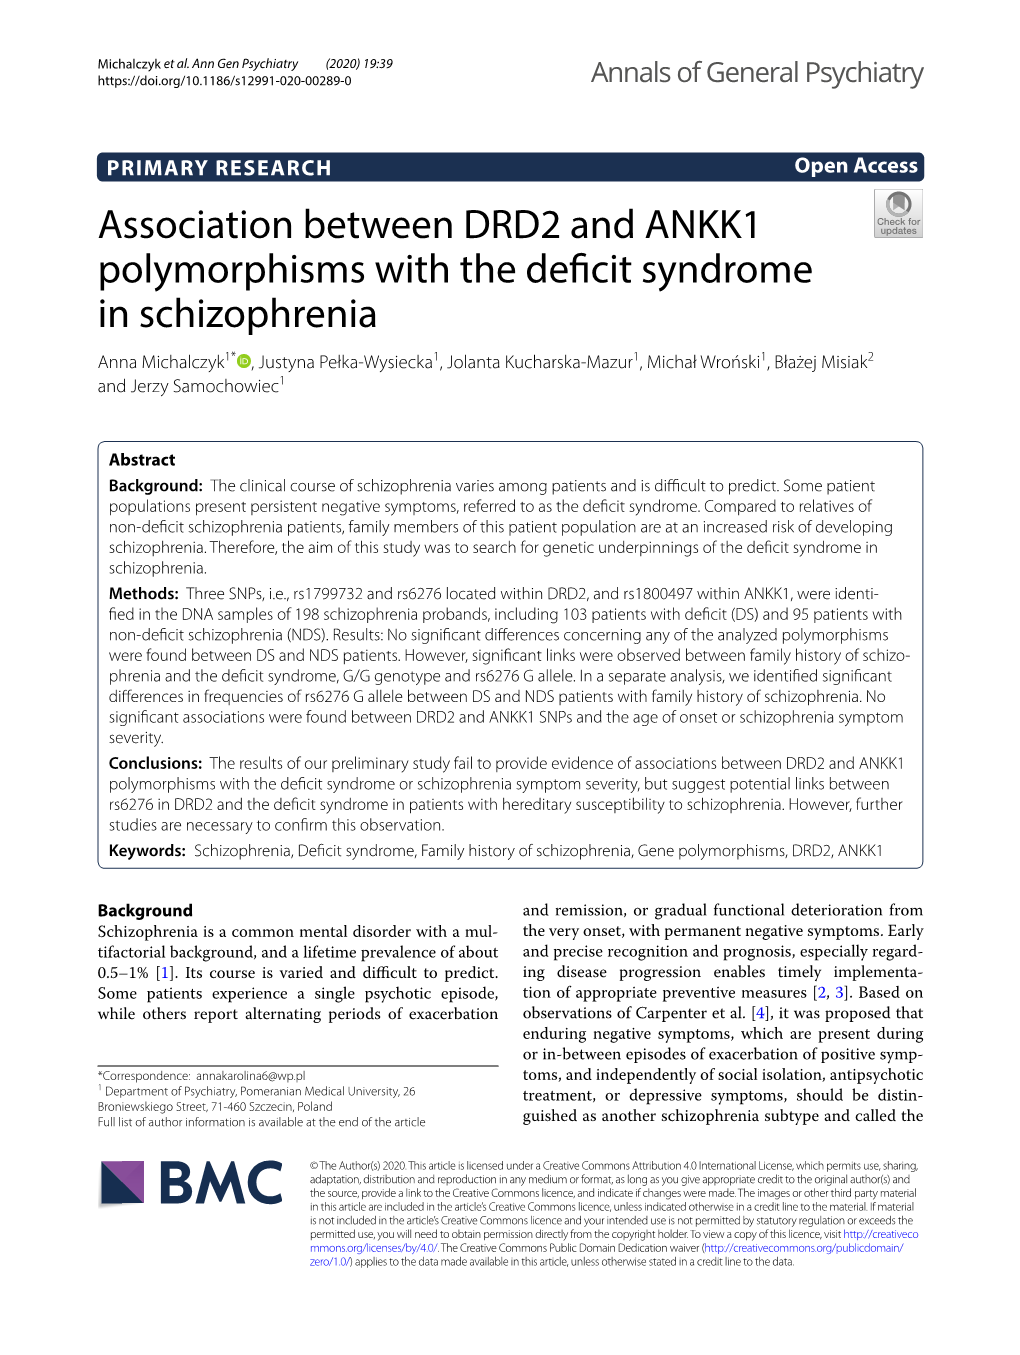 Association Between DRD2 and ANKK1 Polymorphisms with The